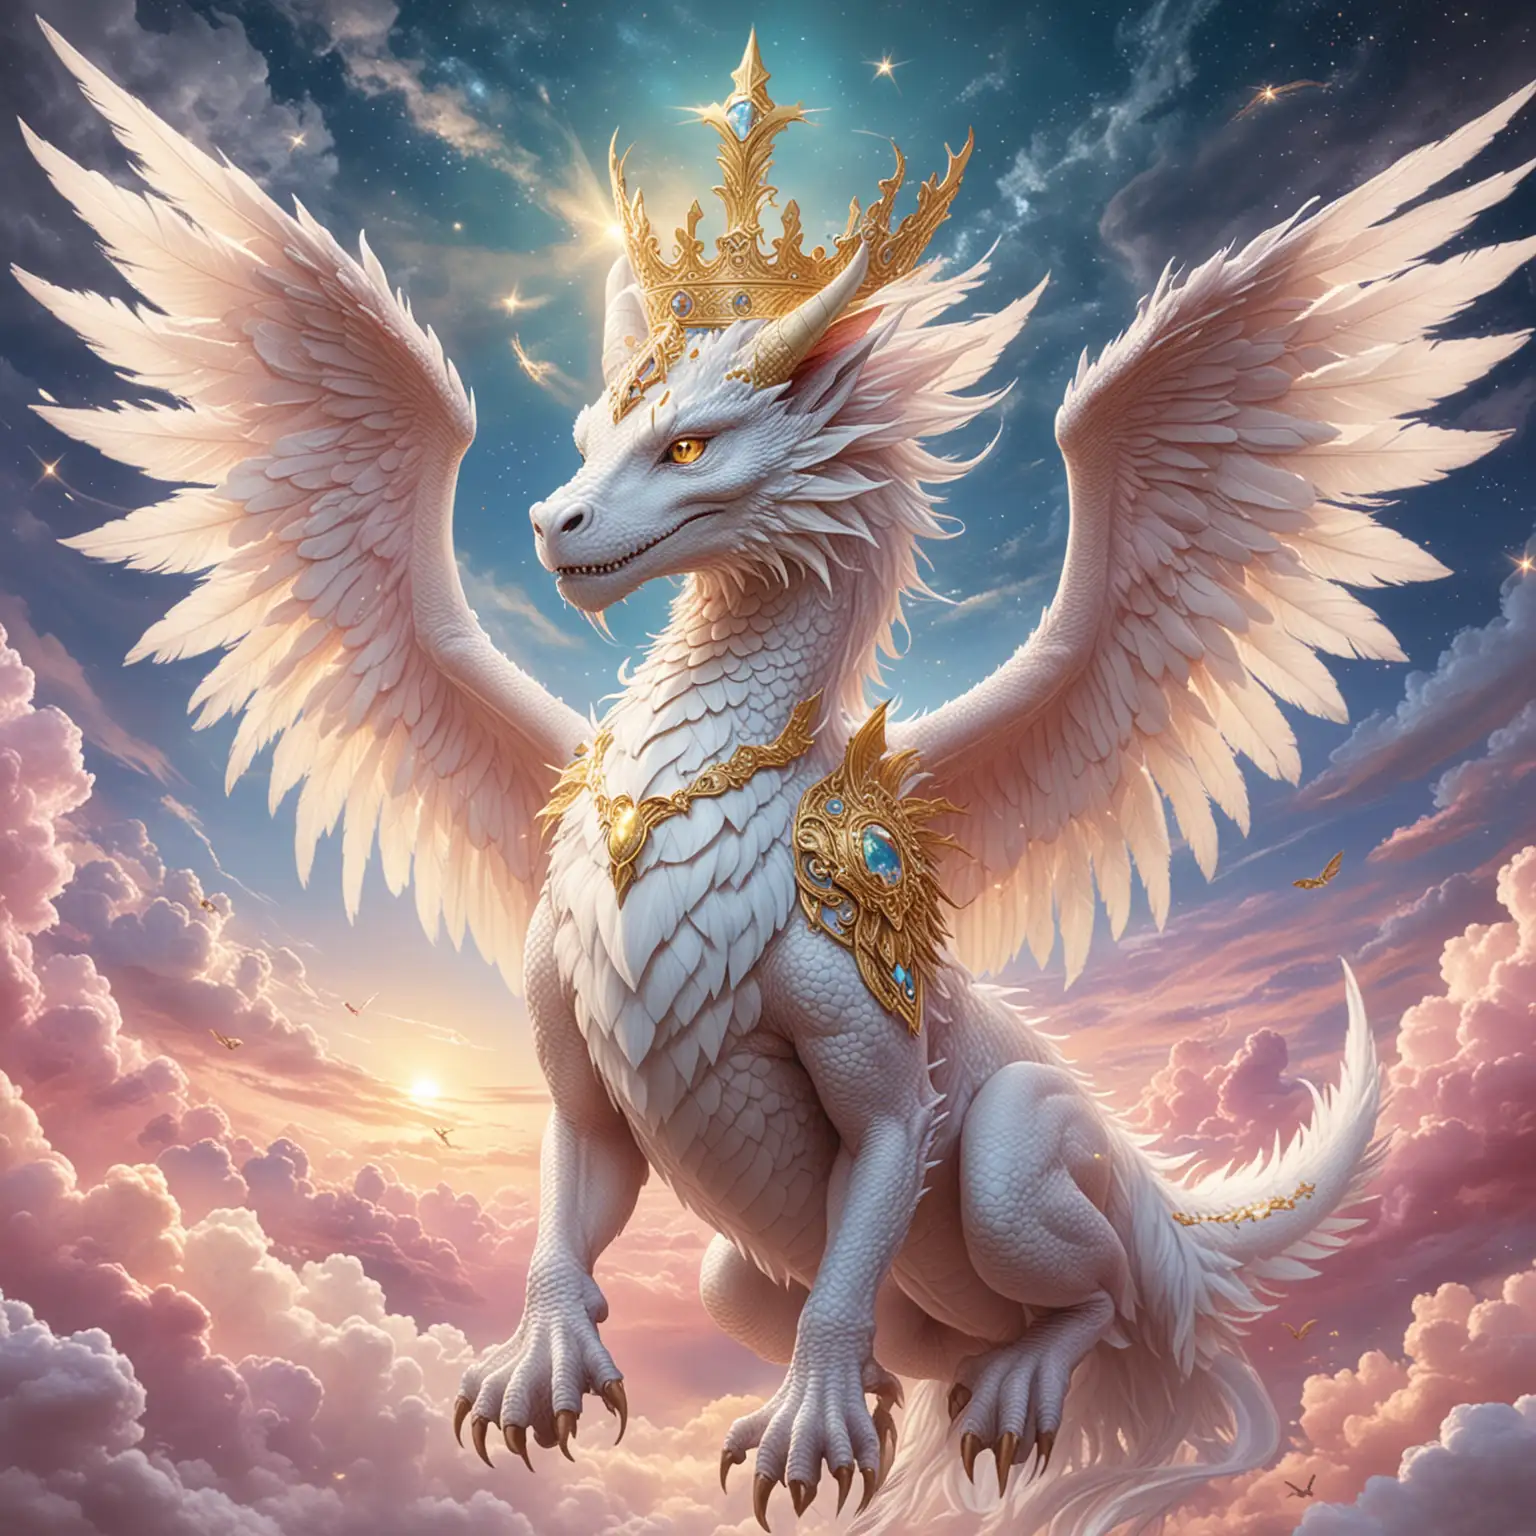 Celestial White Seraphim Female Dragon with Gold Crown Flying in Sky